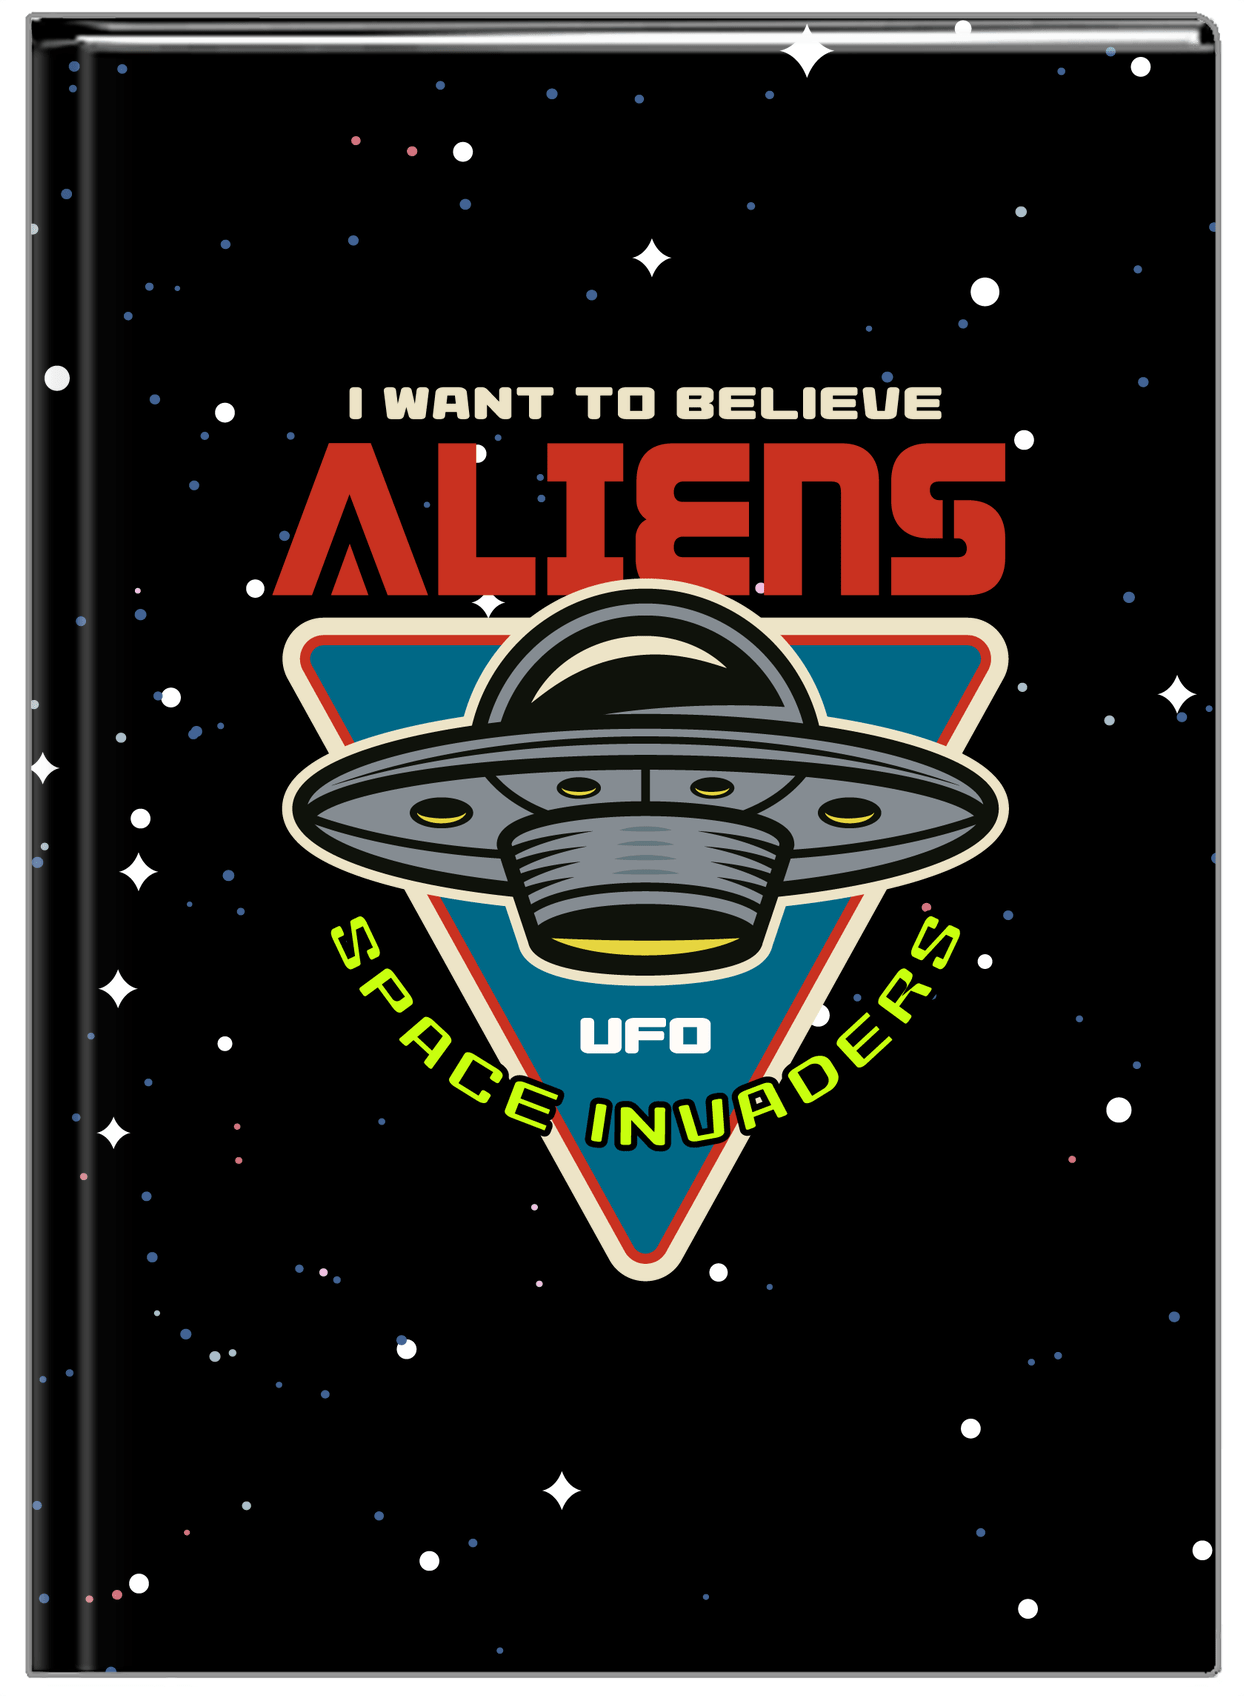 Aliens / UFO Journal - I Want To Believe - Front View